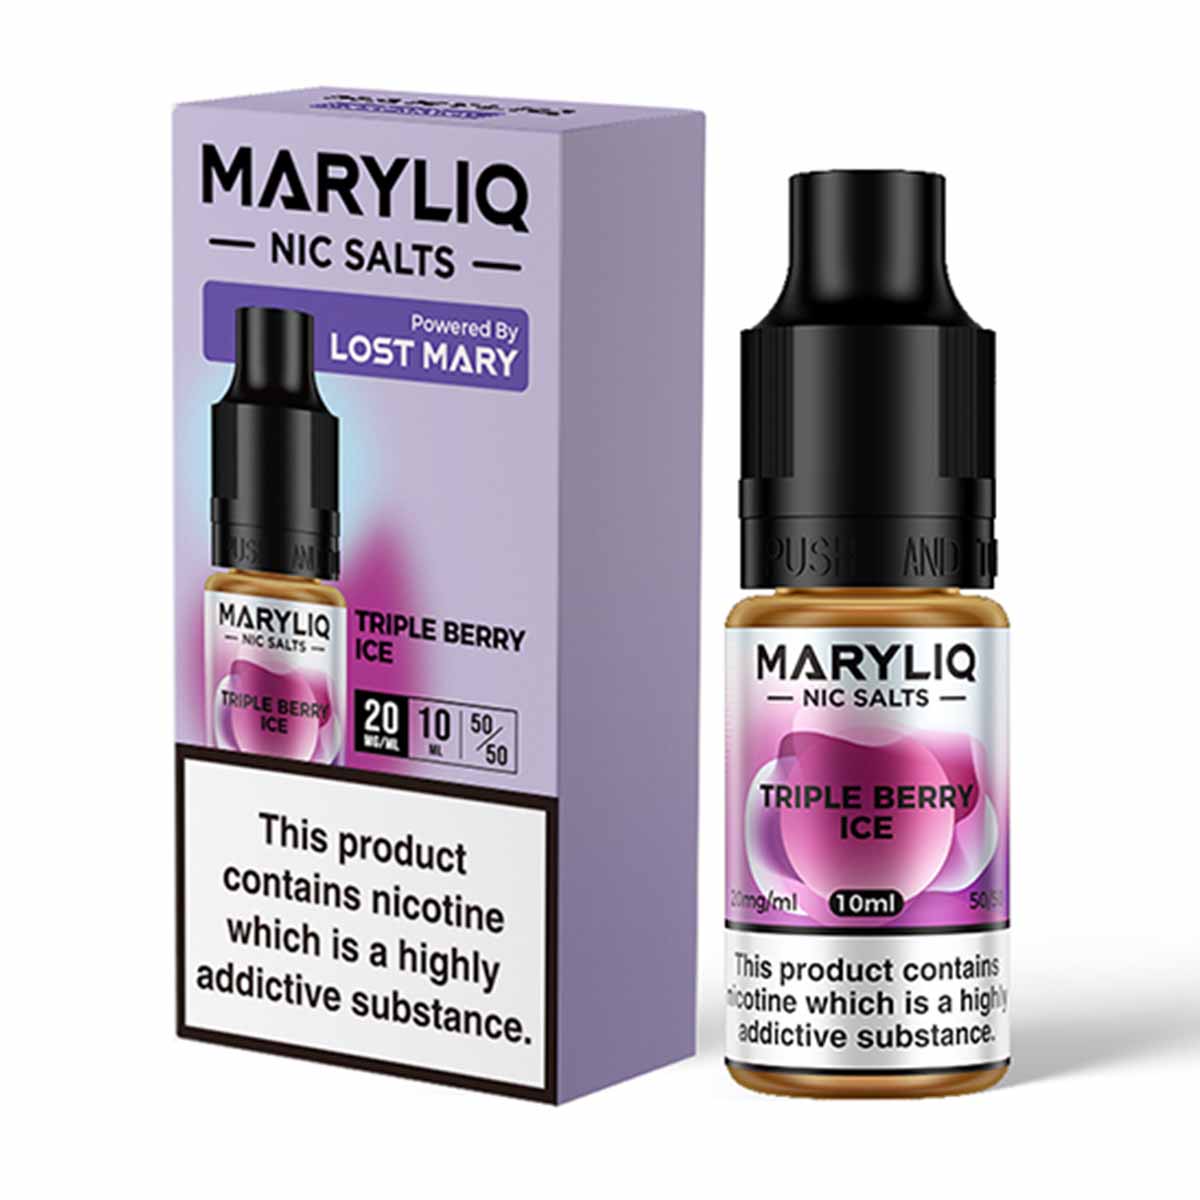 Triple Berry Ice Nic Salt by Lost Mary MaryLiq